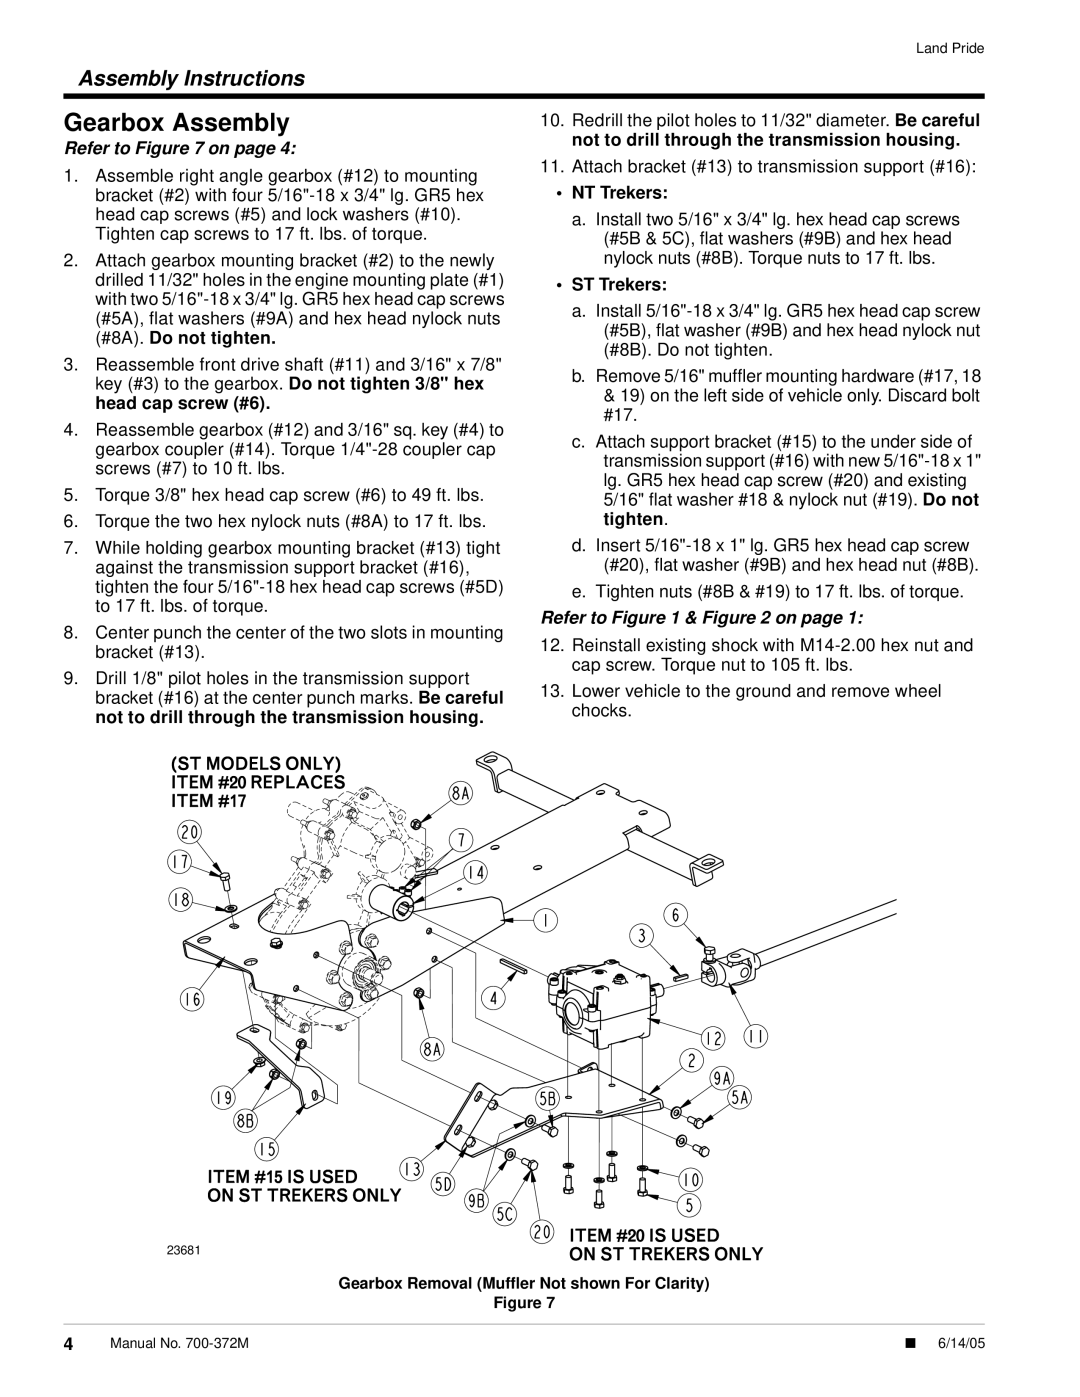 Land Pride 4400NT Gearbox Assembly, Refer to on page, NT Trekers, ST Trekers, Refer to & on page, Assembly Instructions 